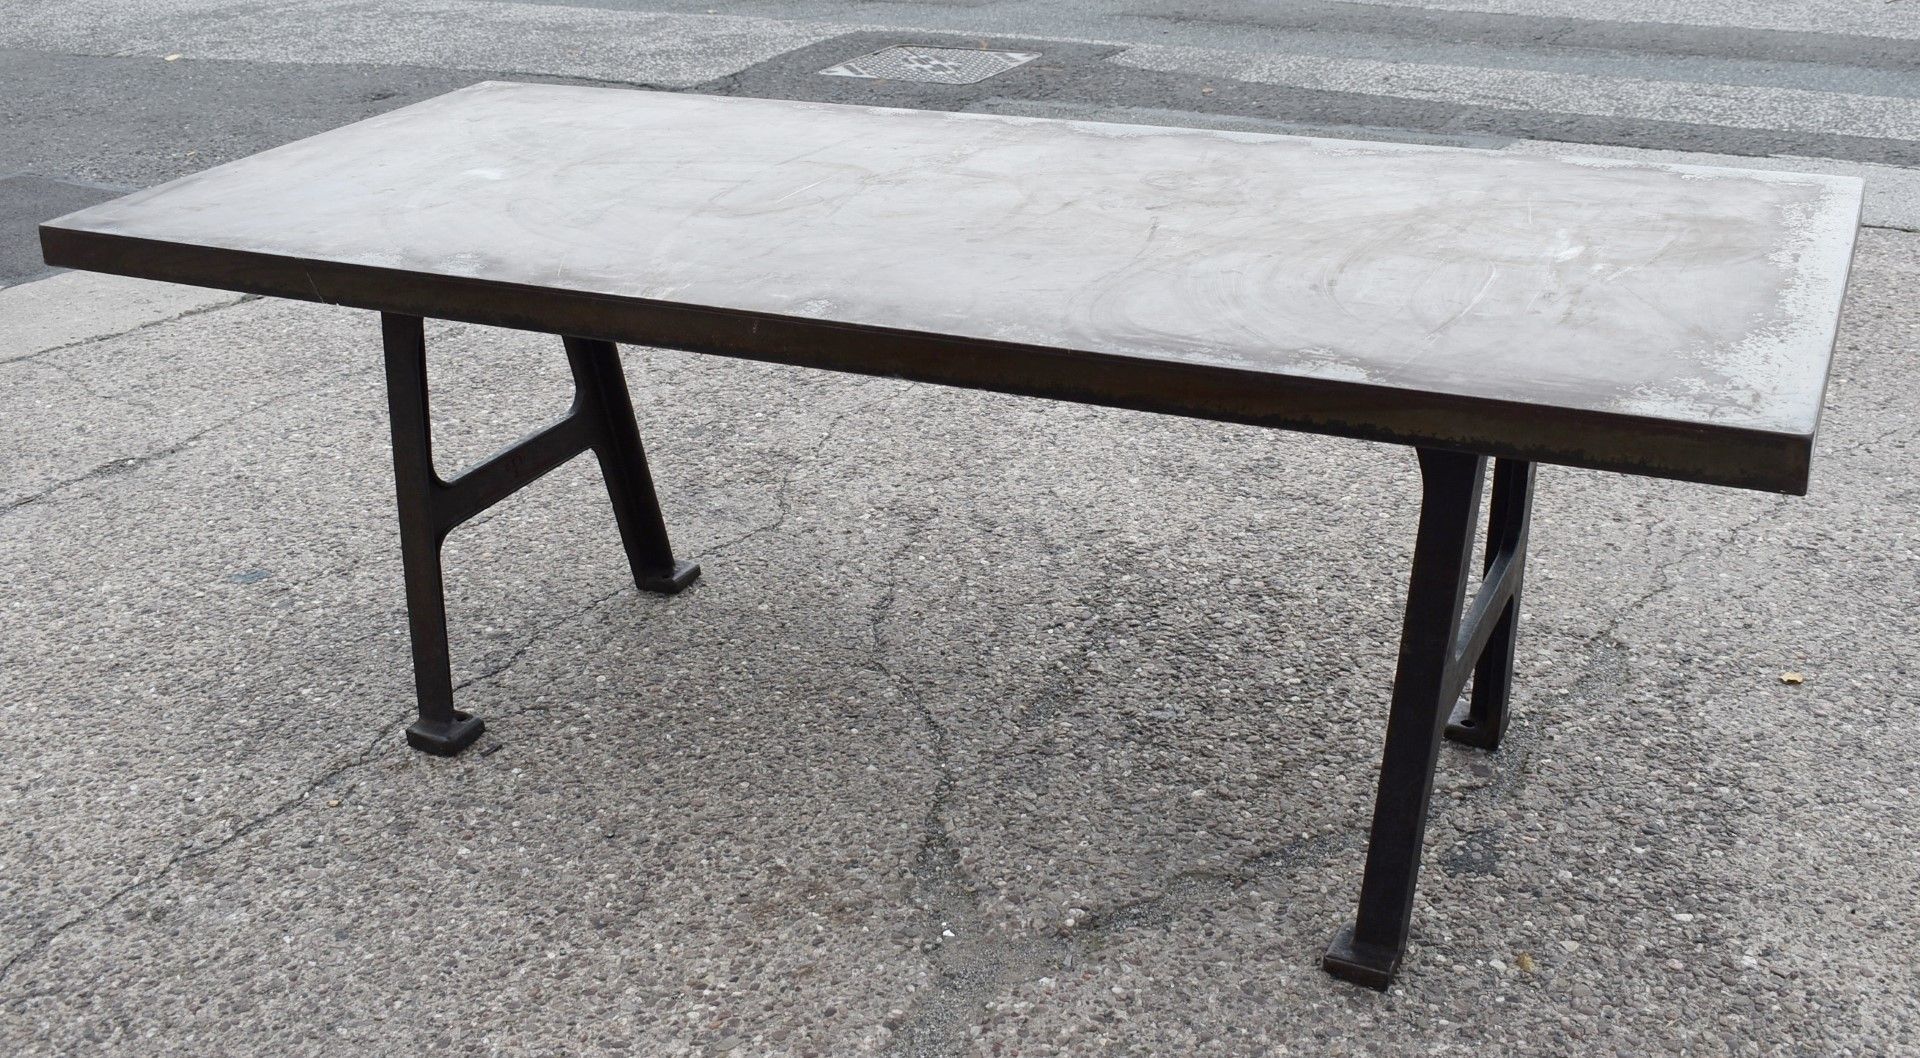 1 x Industrial Style 200cm Banquetting Restaurant Table Featuring a Heavy Steel Top & Steel Legs